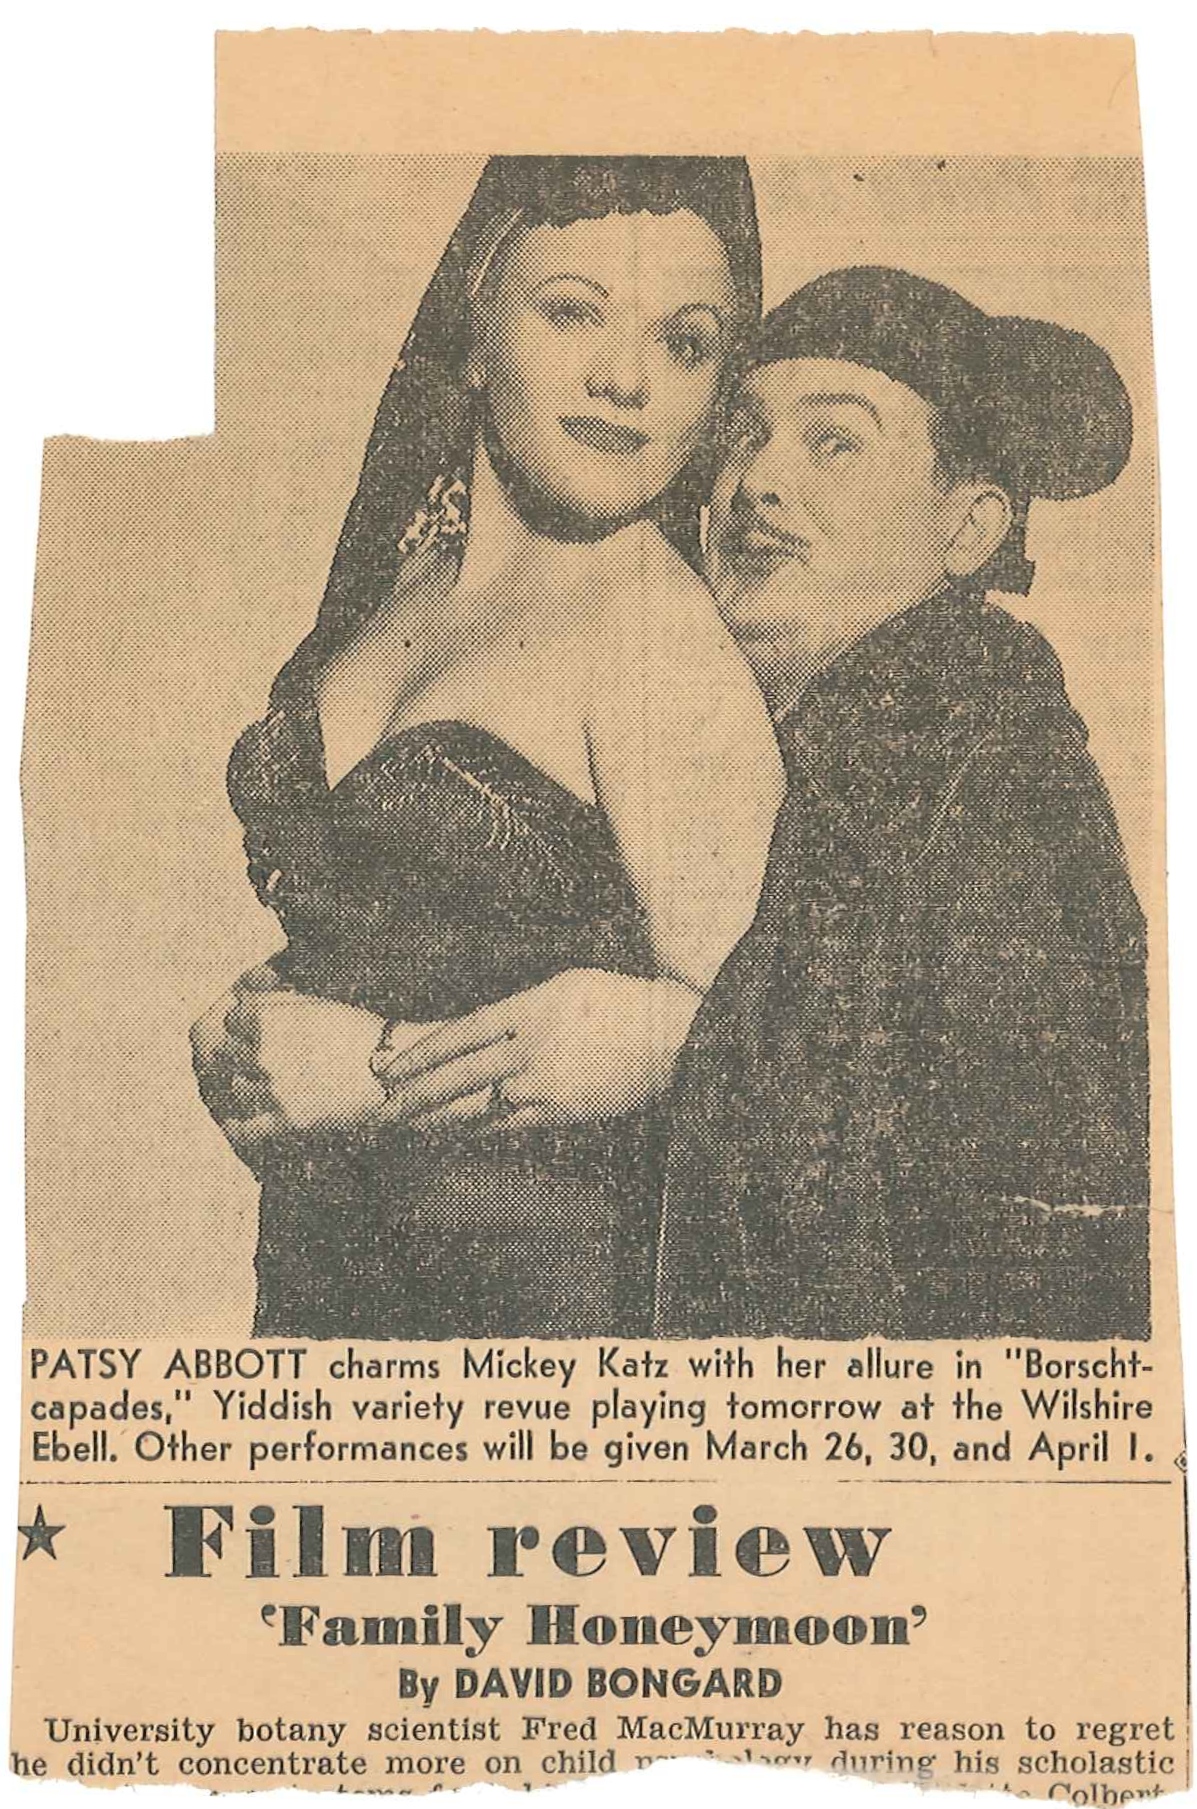 0004NC_Clipping with pic of Patsy Abbott and MK for Borscht Capades at the Wilshire-Ebell_Clippings